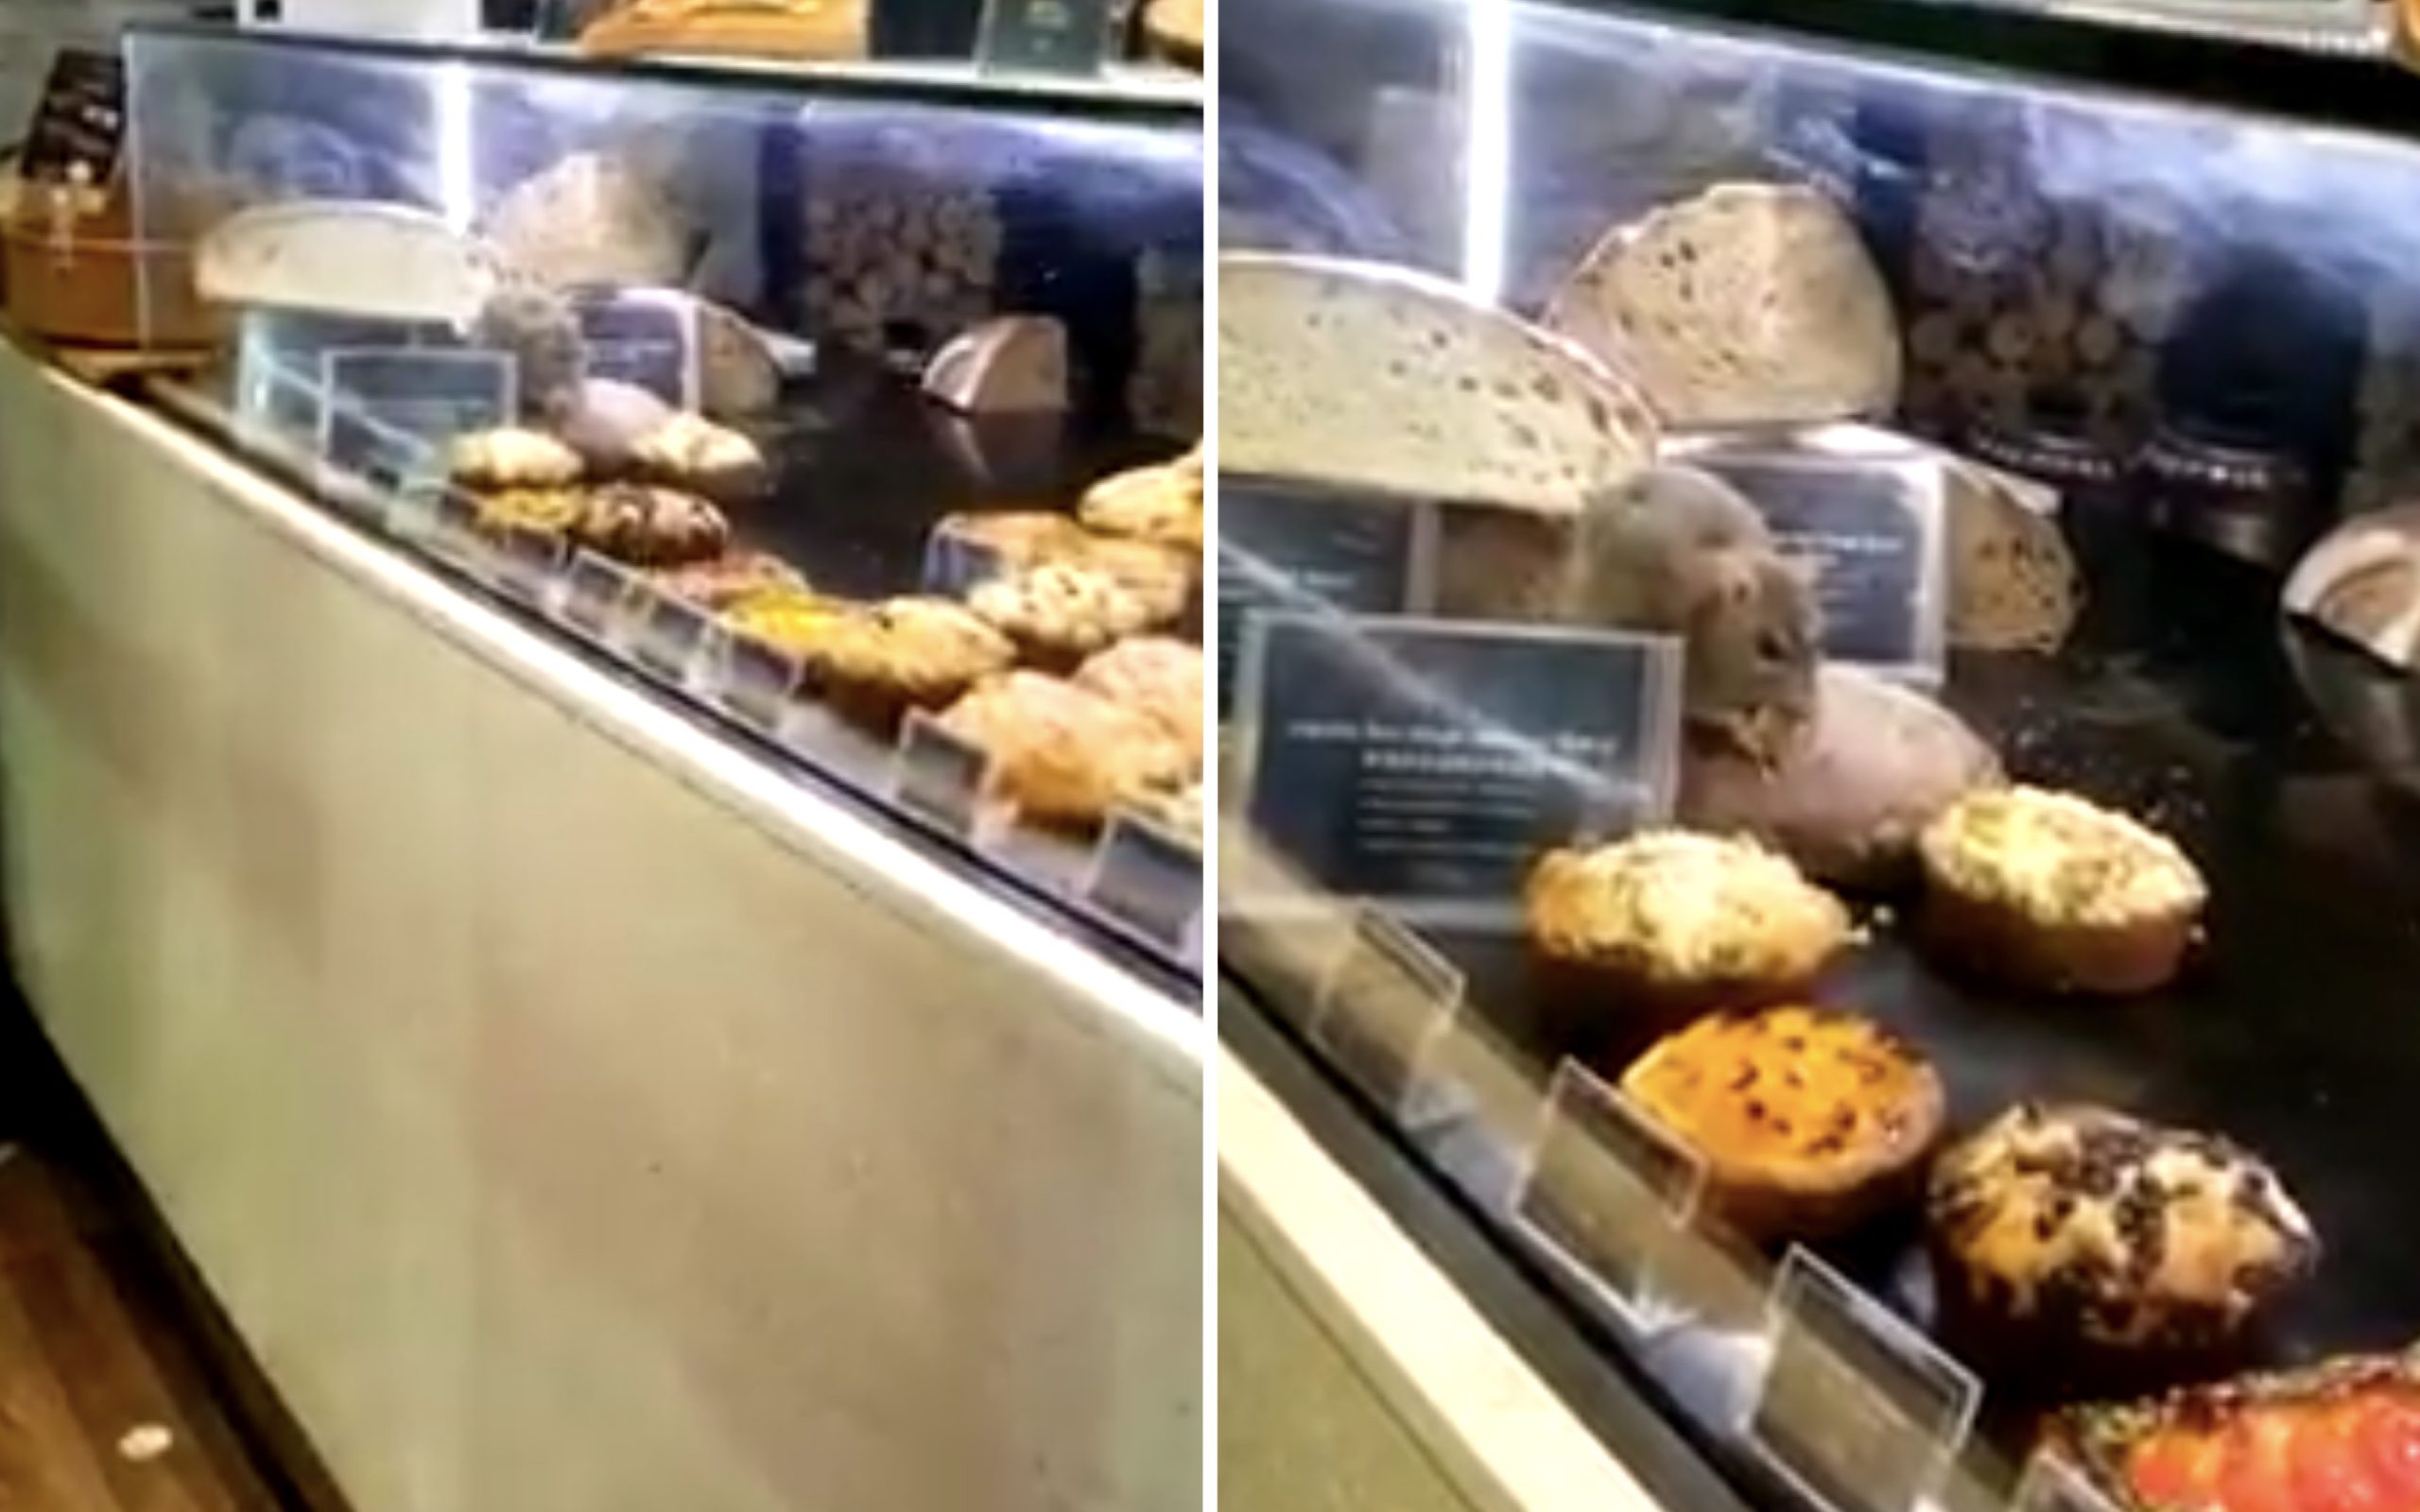 A rodent filmed chowing down on some cakes at a pastry counter of a French bakery chain in Tsim Sha Tsui. Screengrab via Facebook video.